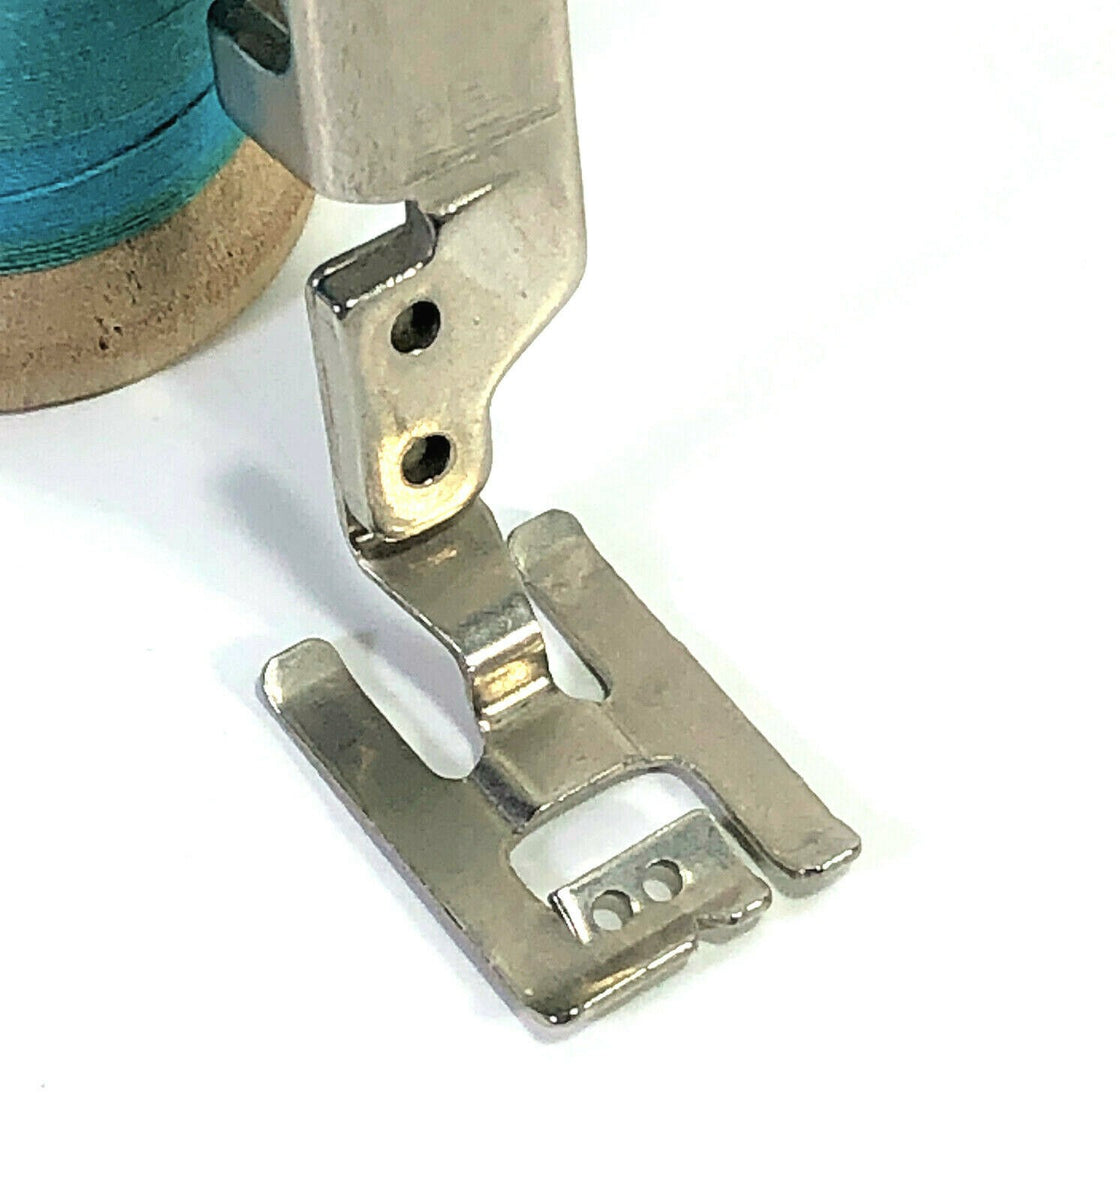 DREAMSTITCH Hinged Slant Shank Tricot Foot Knit Presser Foot for Singer  Sewing Machine